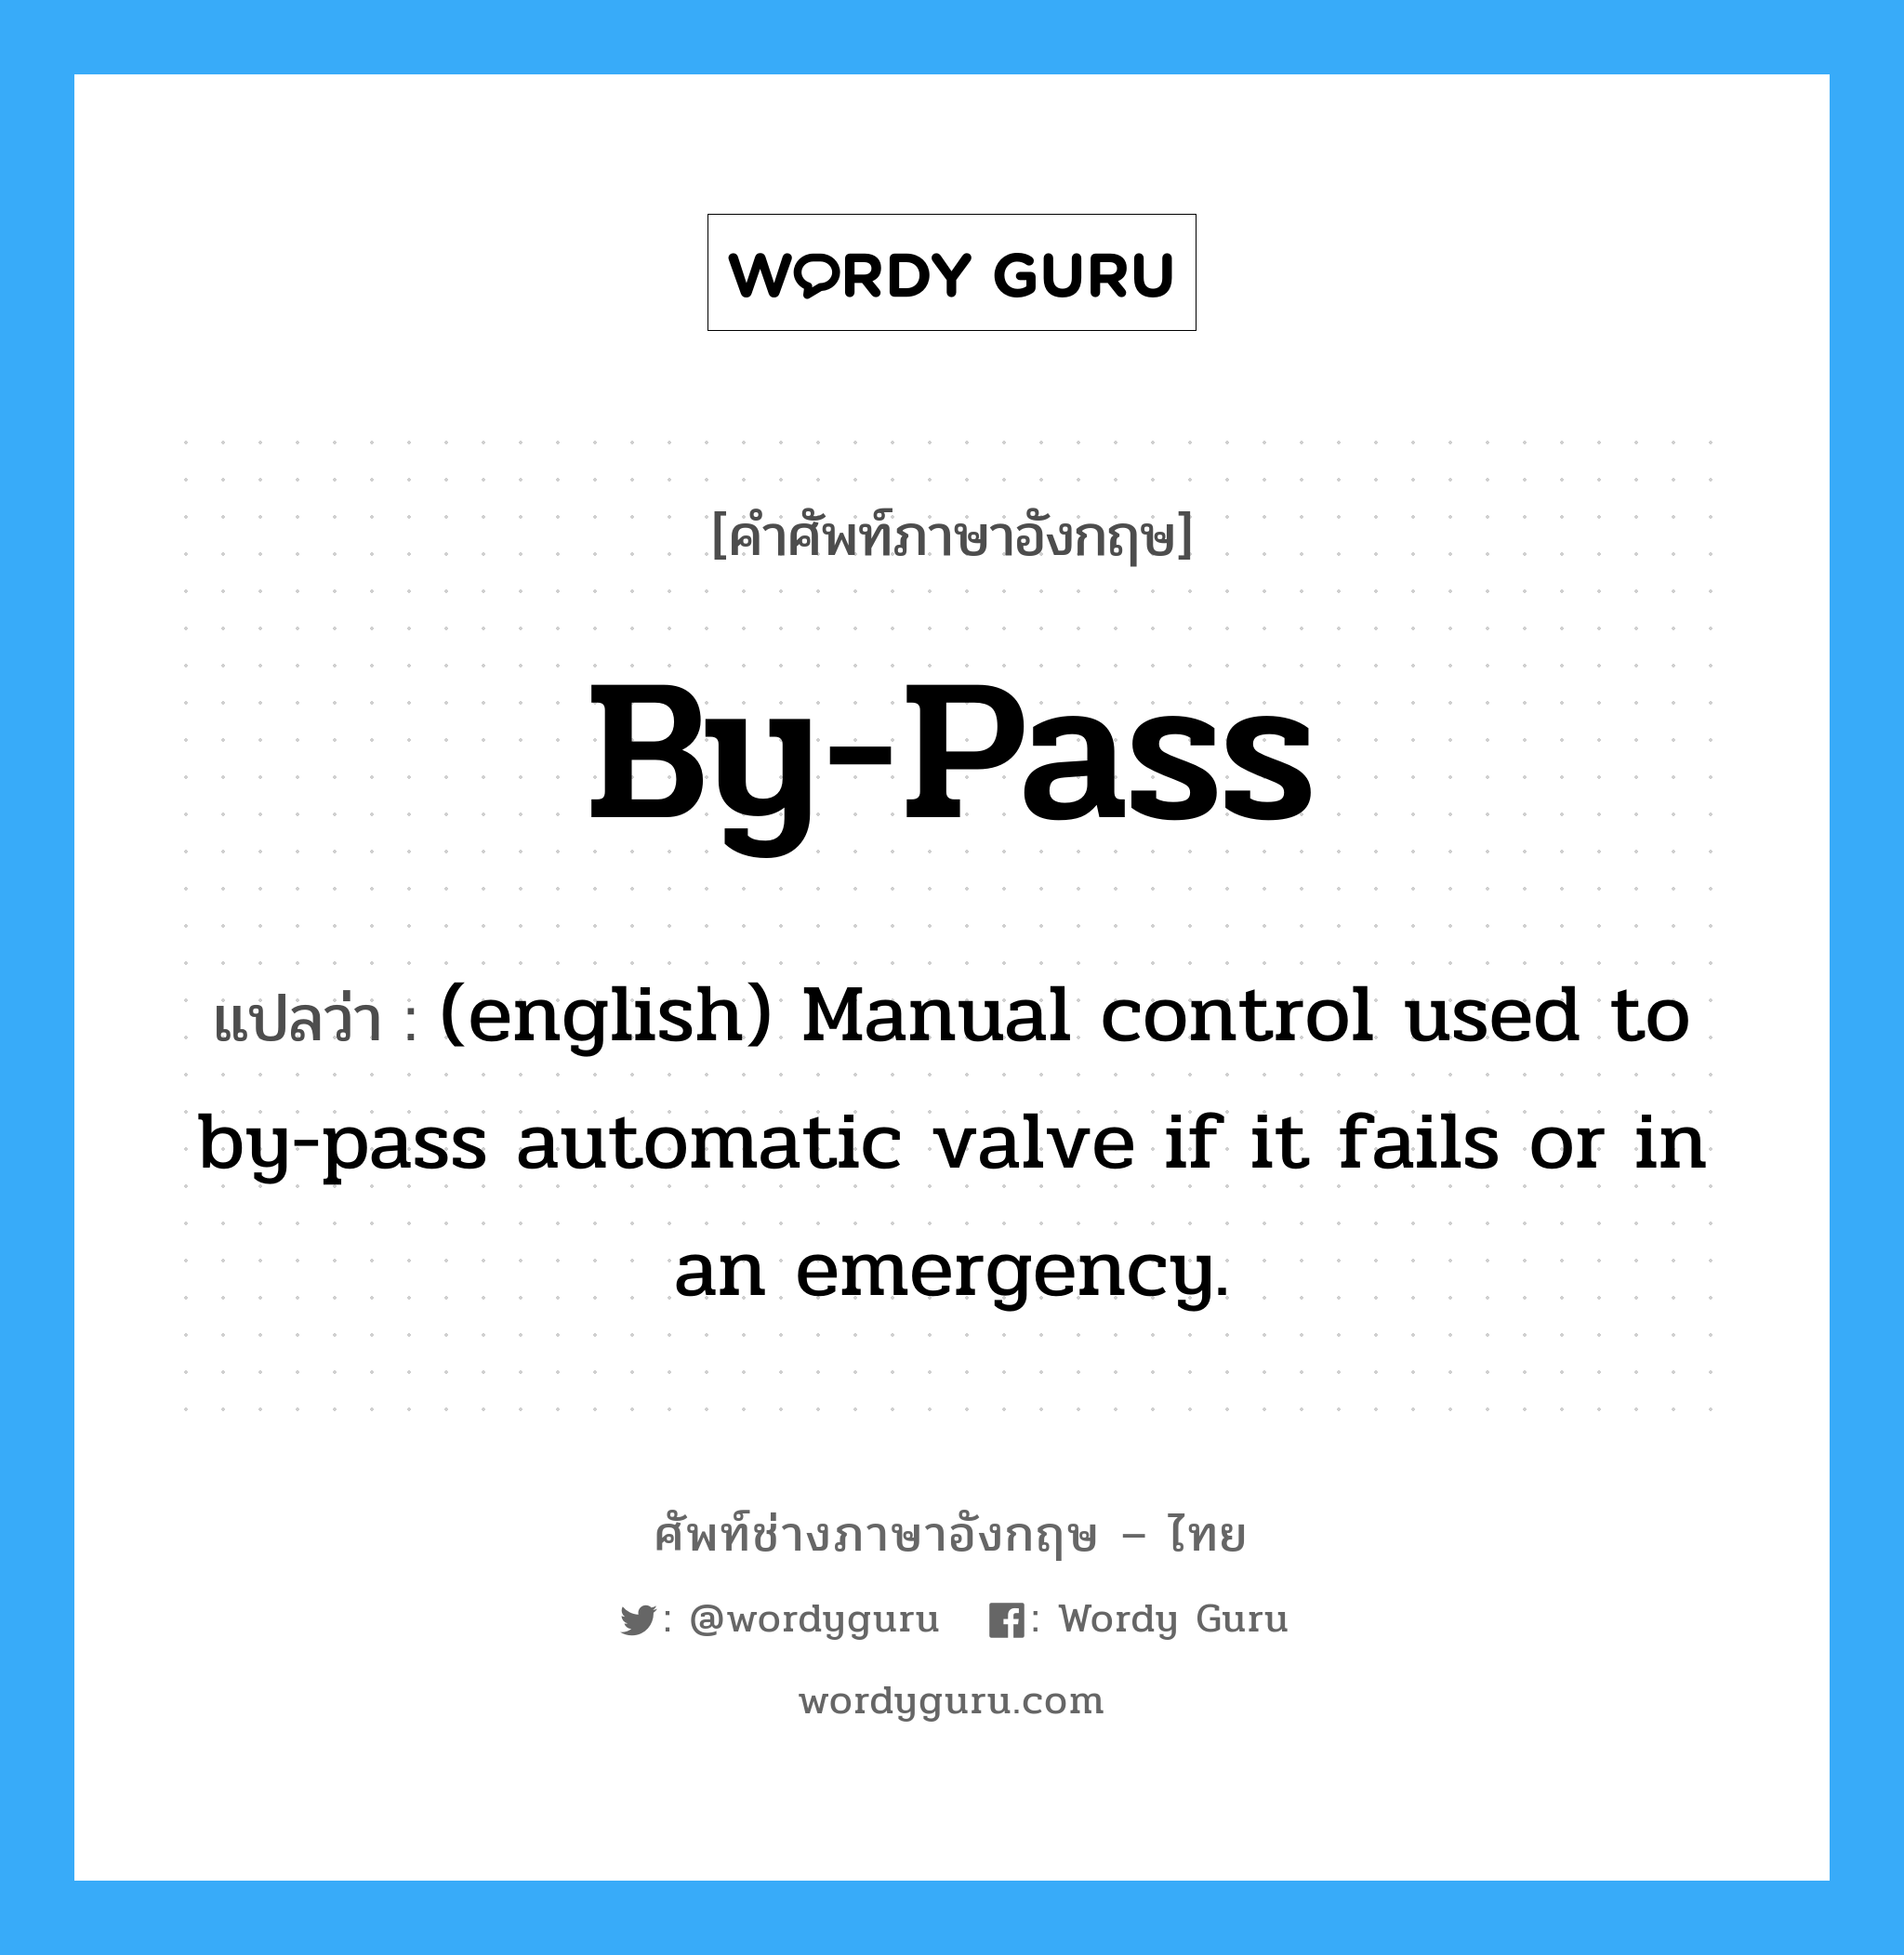 By-Pass แปลว่า?, คำศัพท์ช่างภาษาอังกฤษ - ไทย By-Pass คำศัพท์ภาษาอังกฤษ By-Pass แปลว่า (english) Manual control used to by-pass automatic valve if it fails or in an emergency.